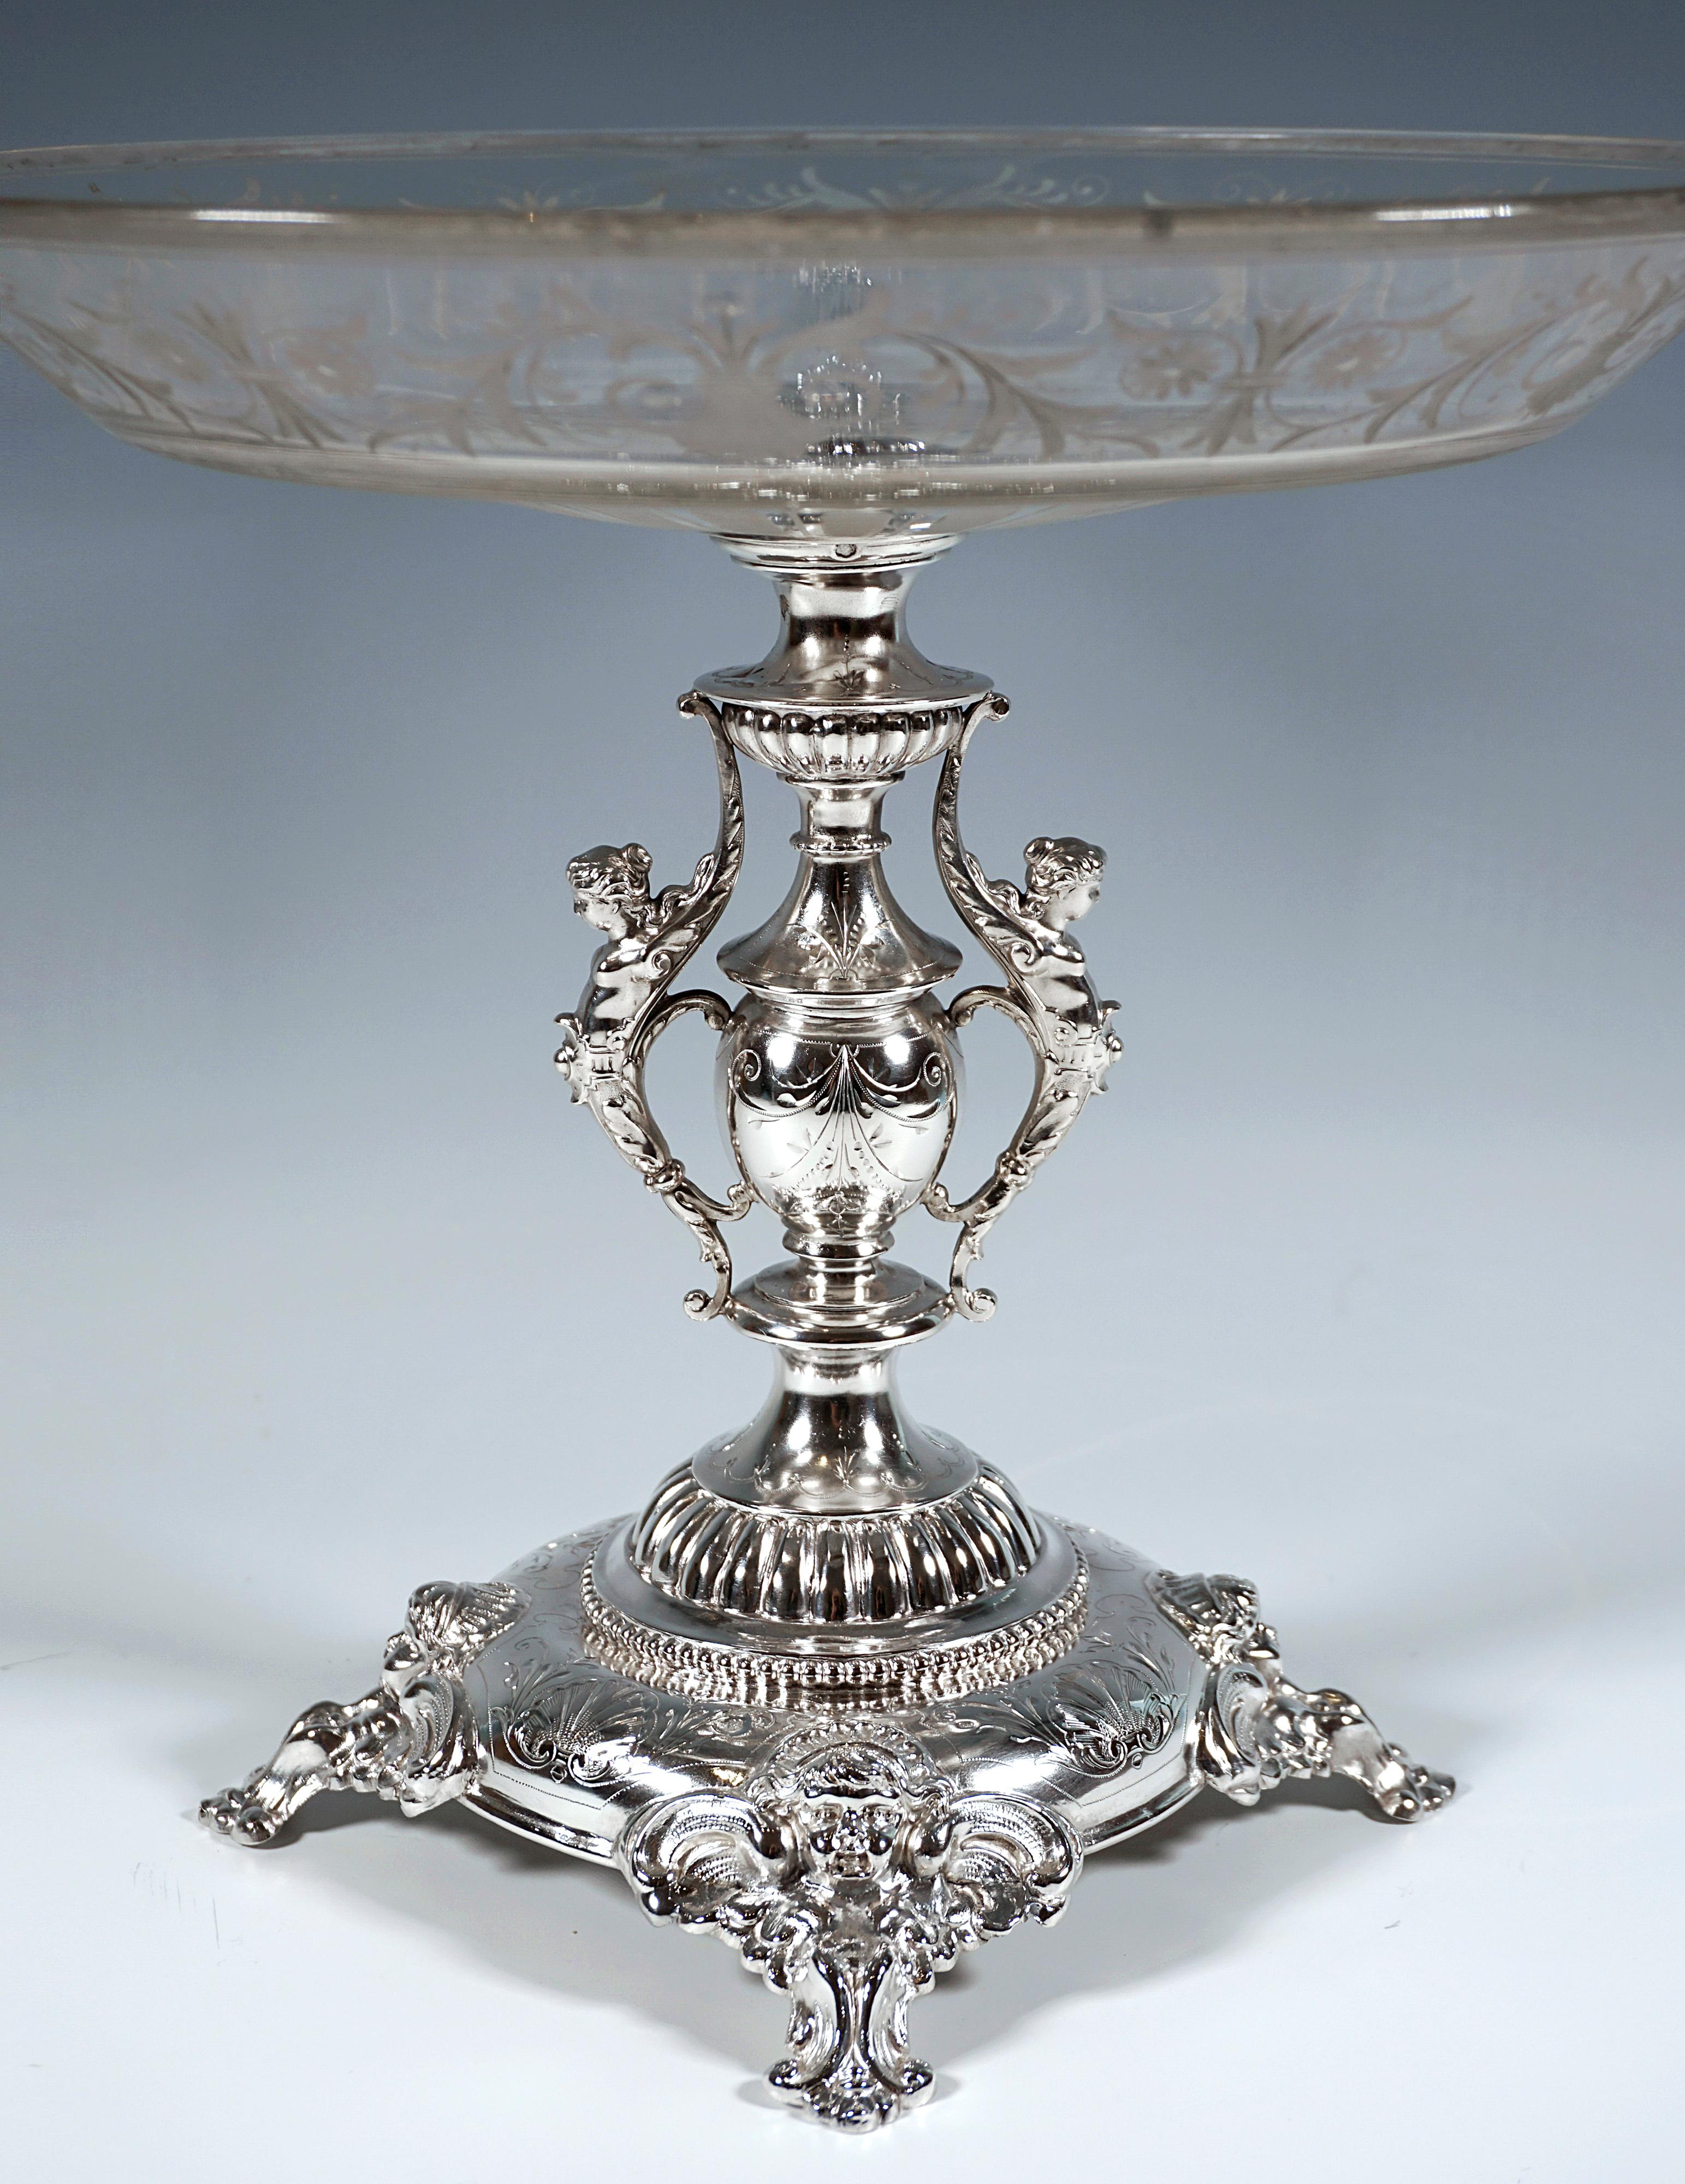 Elegant silver centerpiece on a round, multi-stepped curved base with four square rocaille feet with putti heads in relief, finely chased shell and floral decoration, baluster-shaped shaft with chased trim and leaf festoons, on the sides, opposite